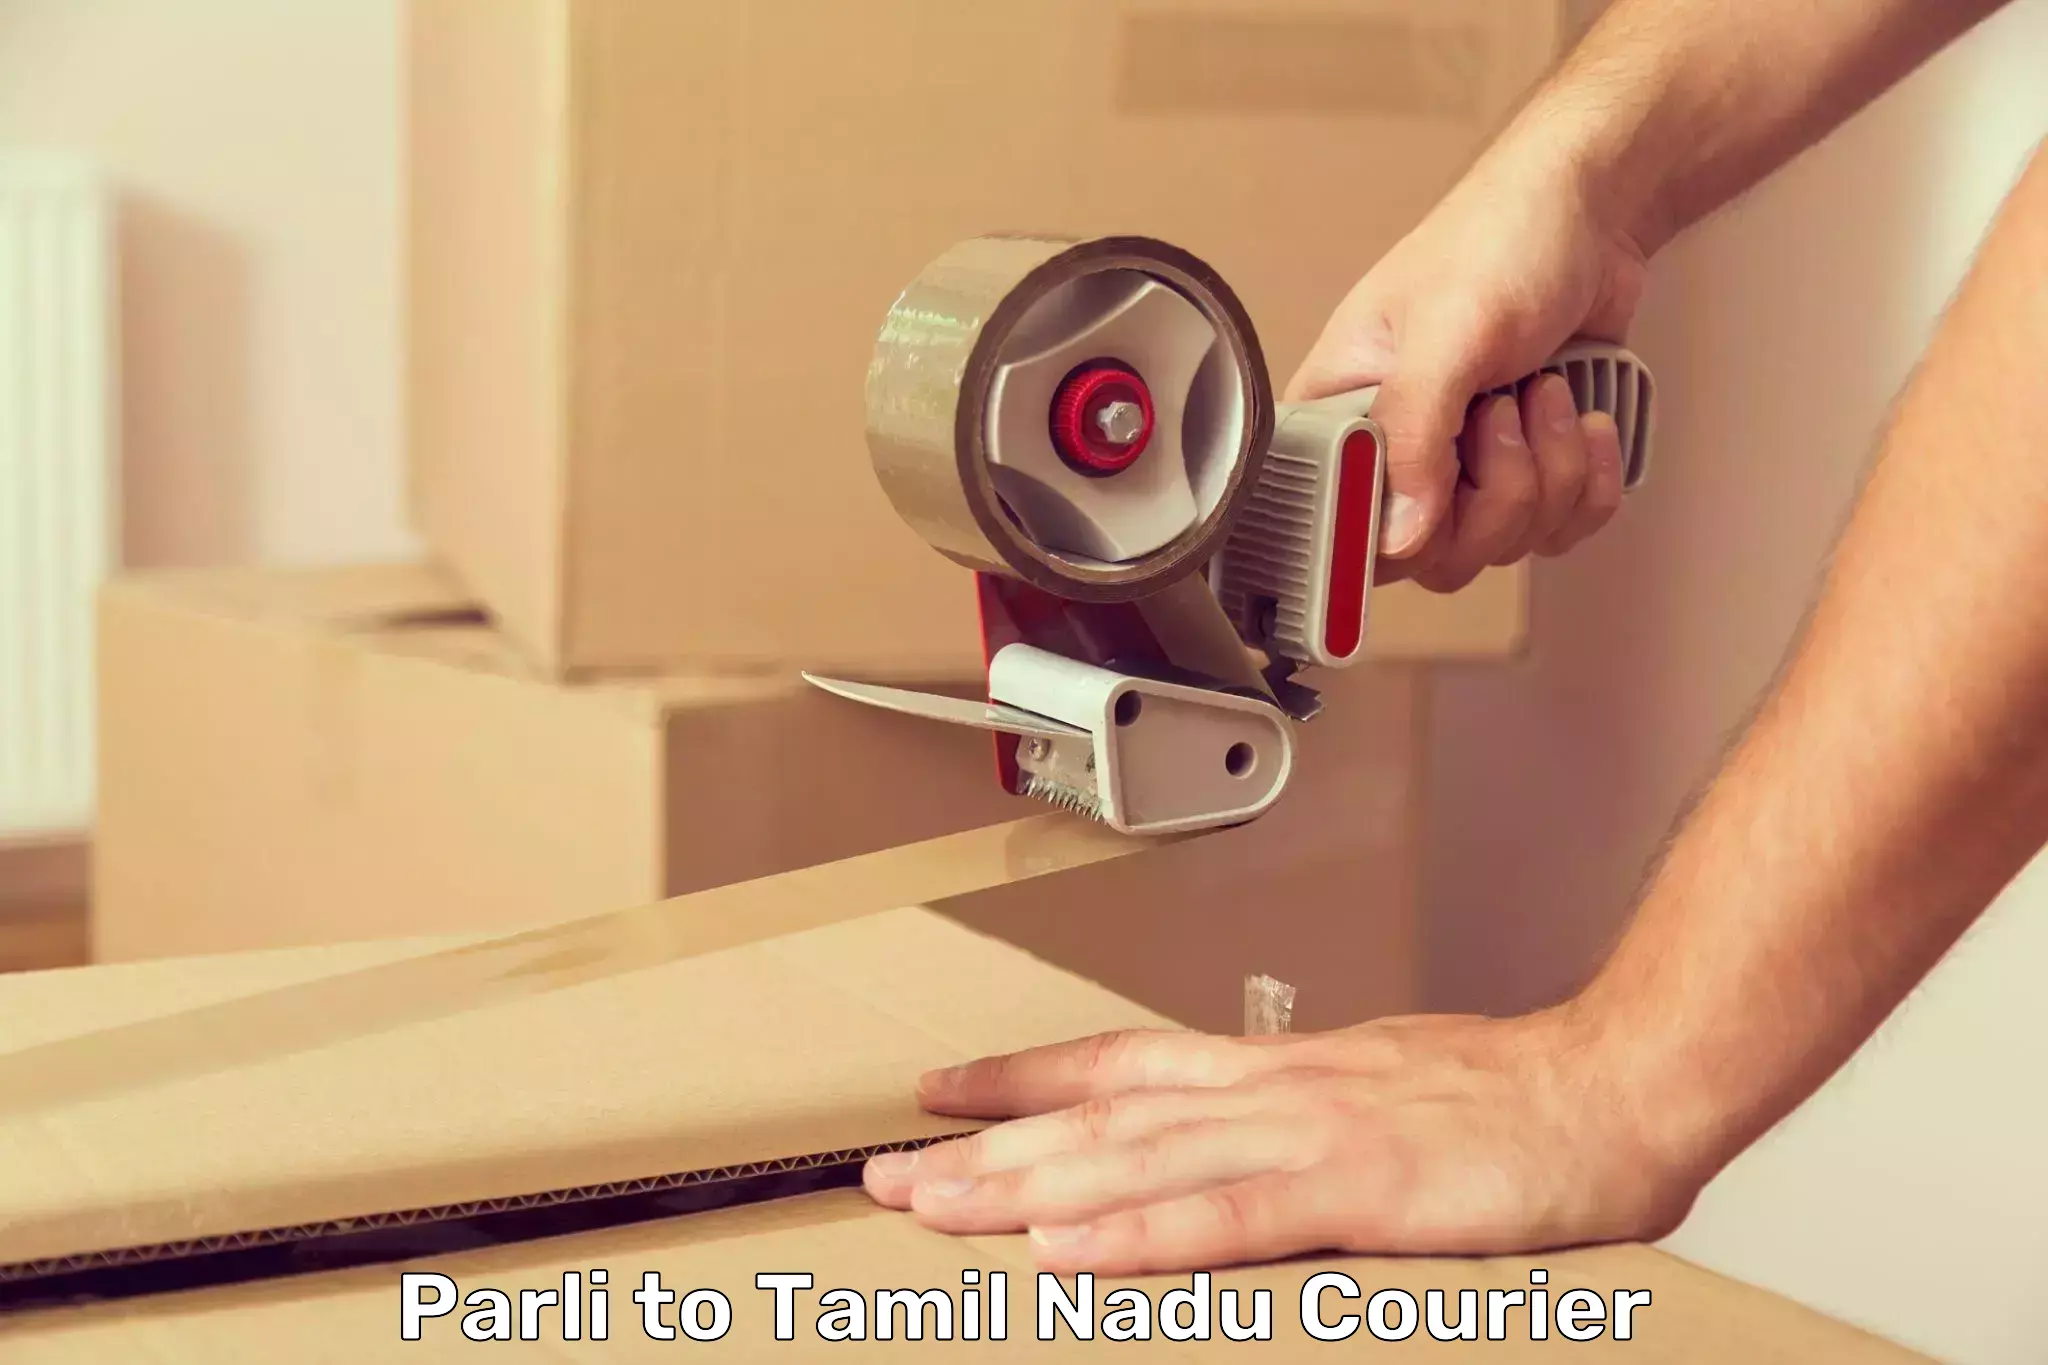 Courier membership Parli to Omalur